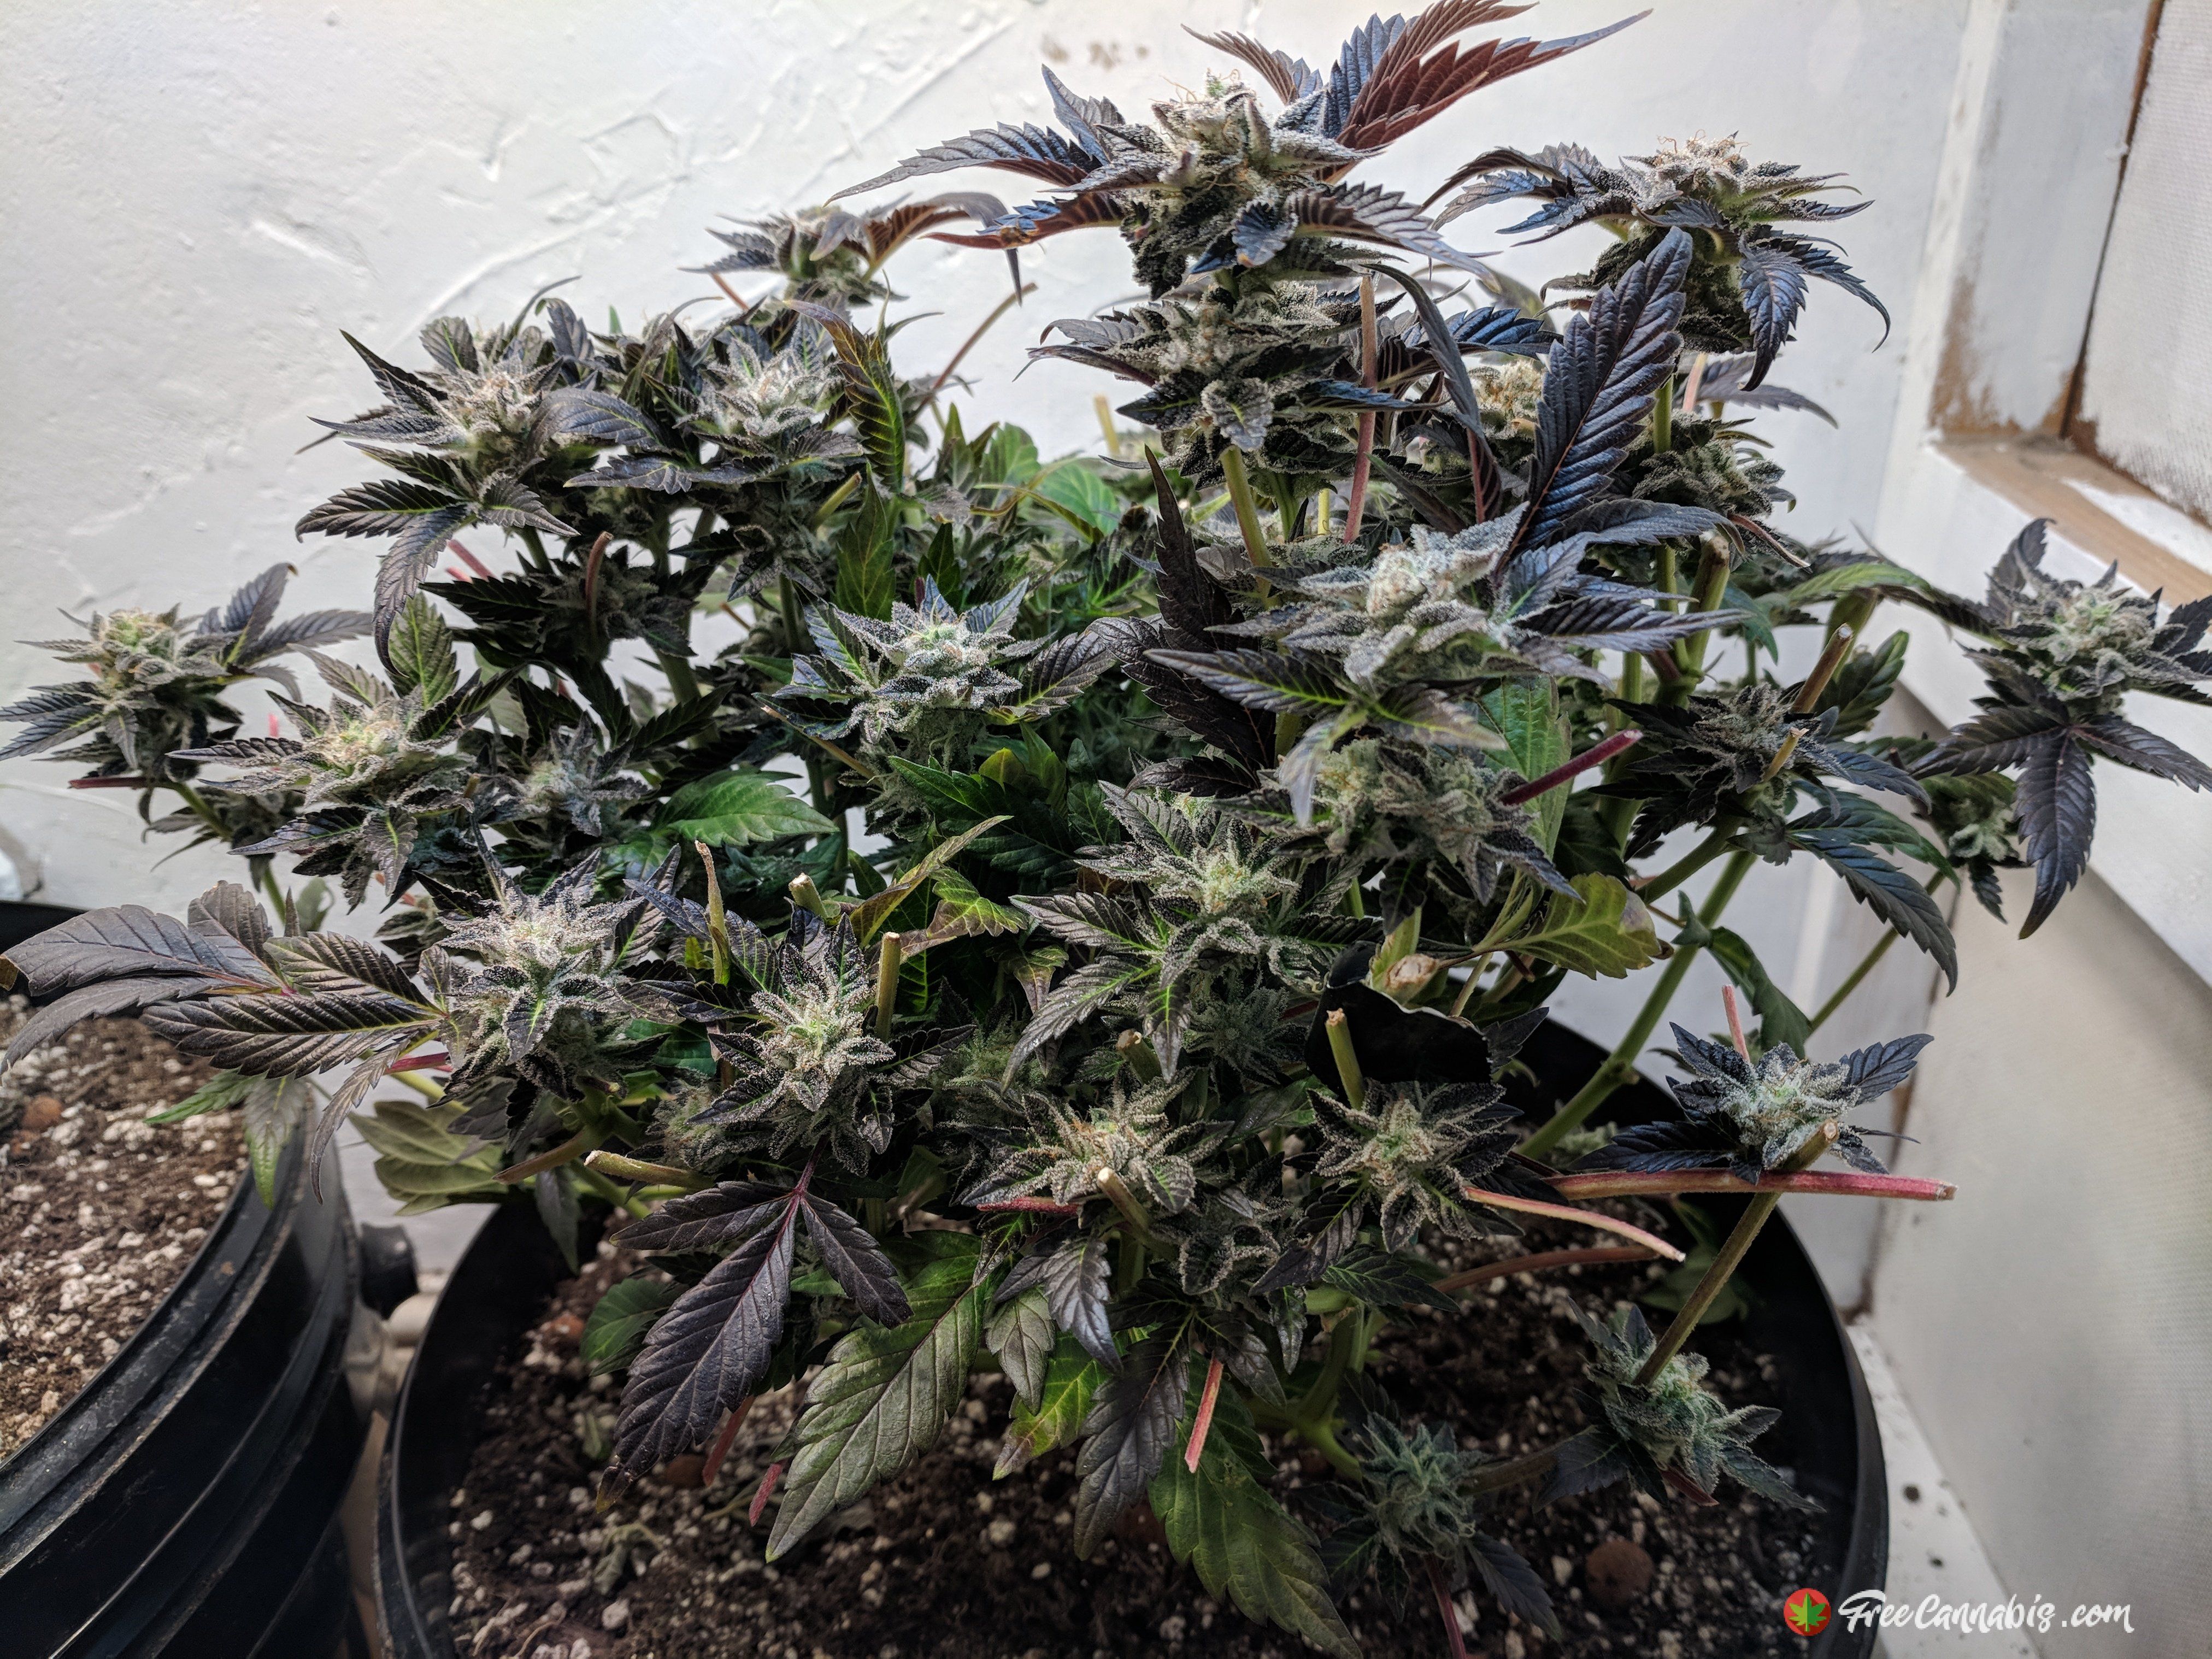 Second phase harvest of lower buds